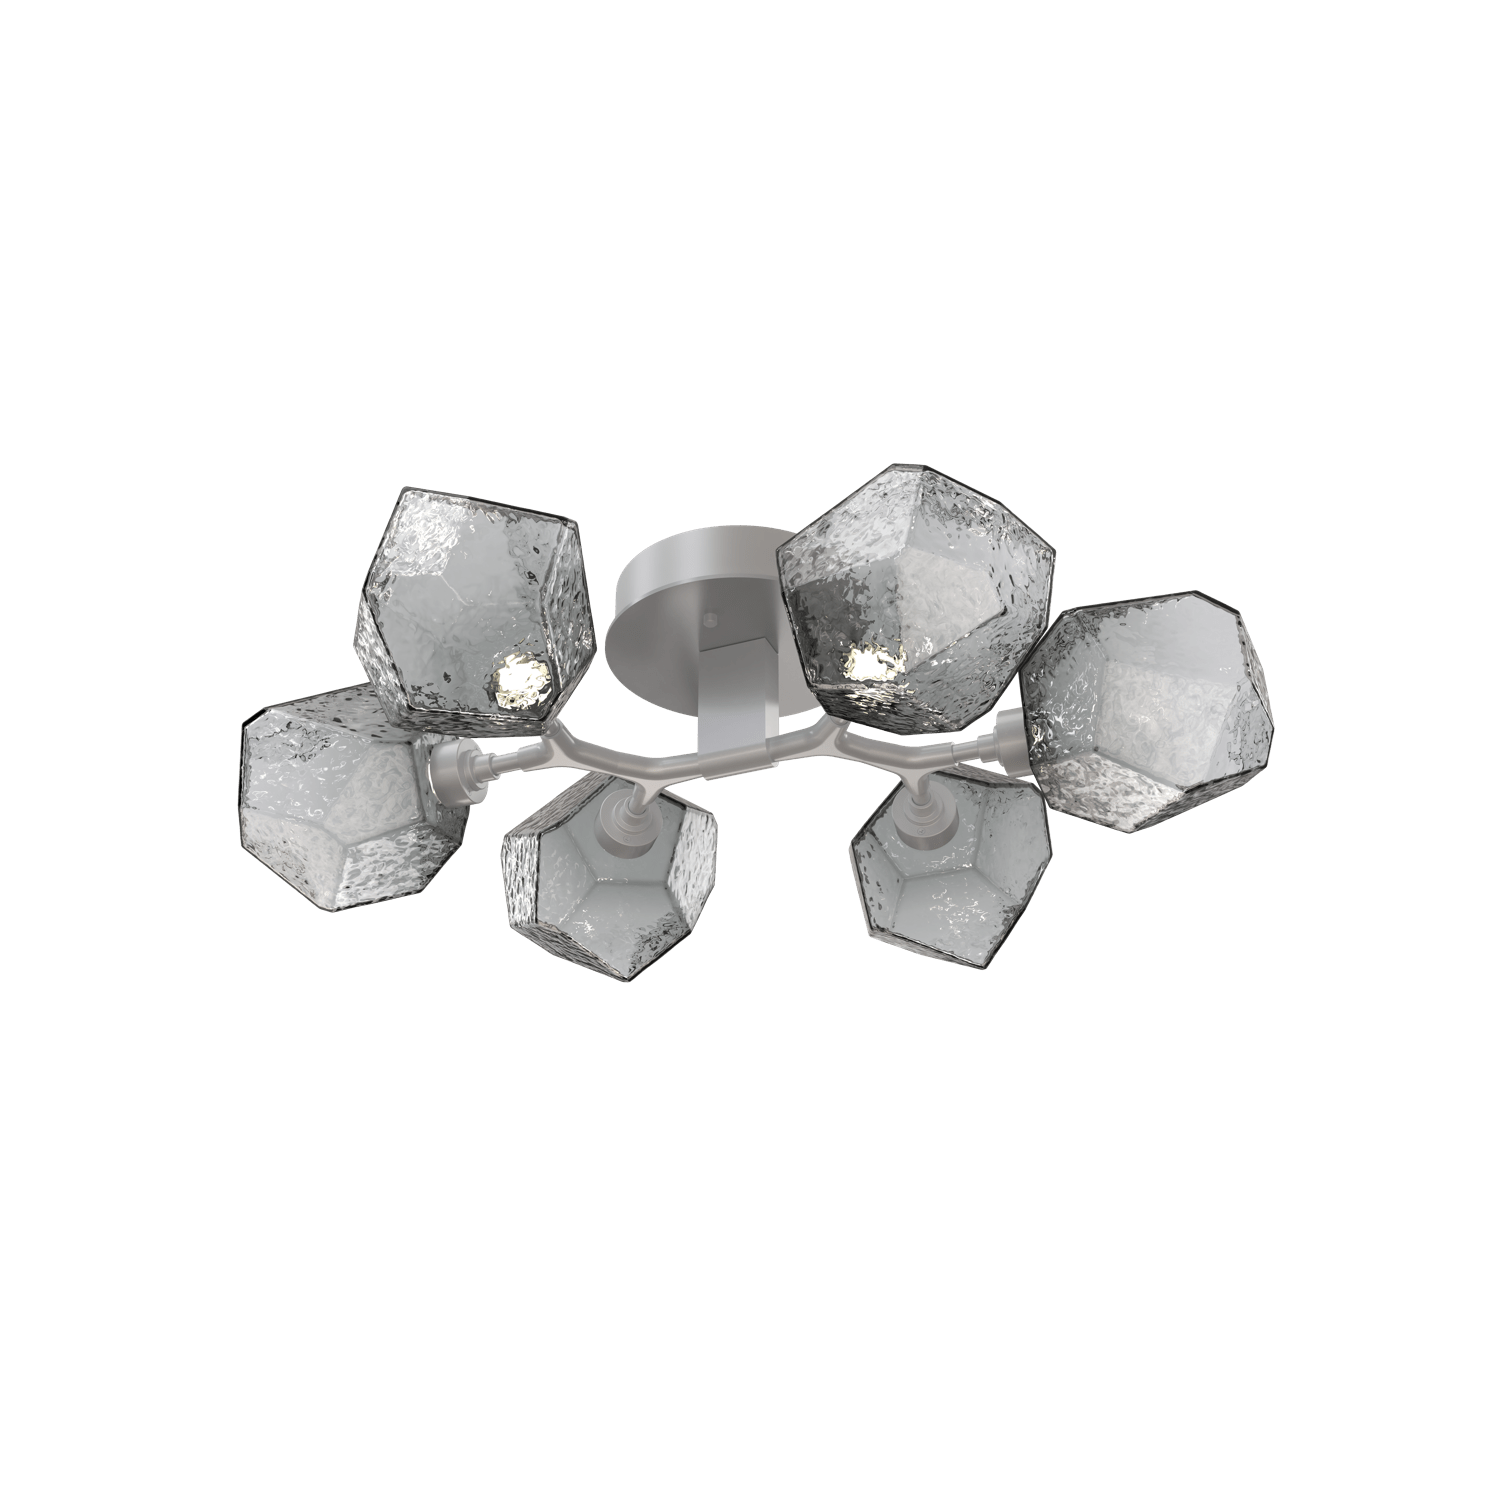 CLB0039-01-CS-S-Hammerton-Studio-Gem-6-light-organic-flush-mount-light-with-classic-silver-finish-and-smoke-blown-glass-shades-and-LED-lamping